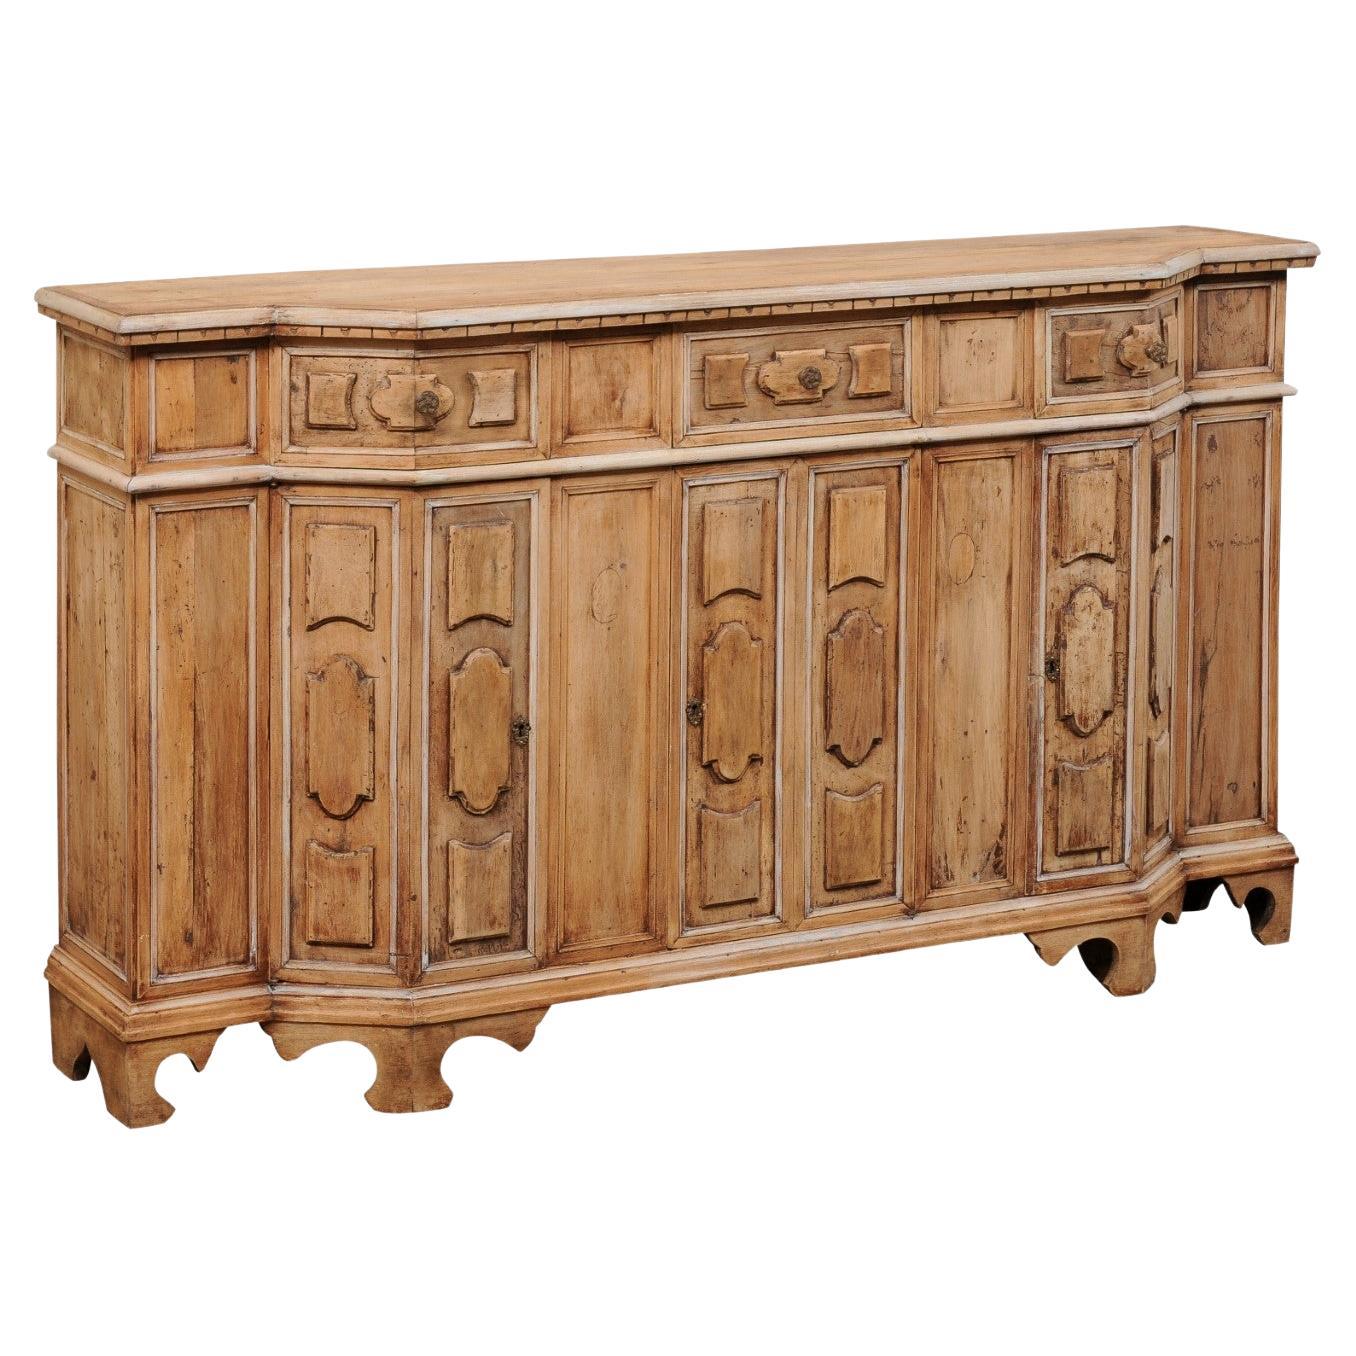 Italian 19th C. Nicely-Carved Wood Break-Front Credenza 'with Slender Depth!'